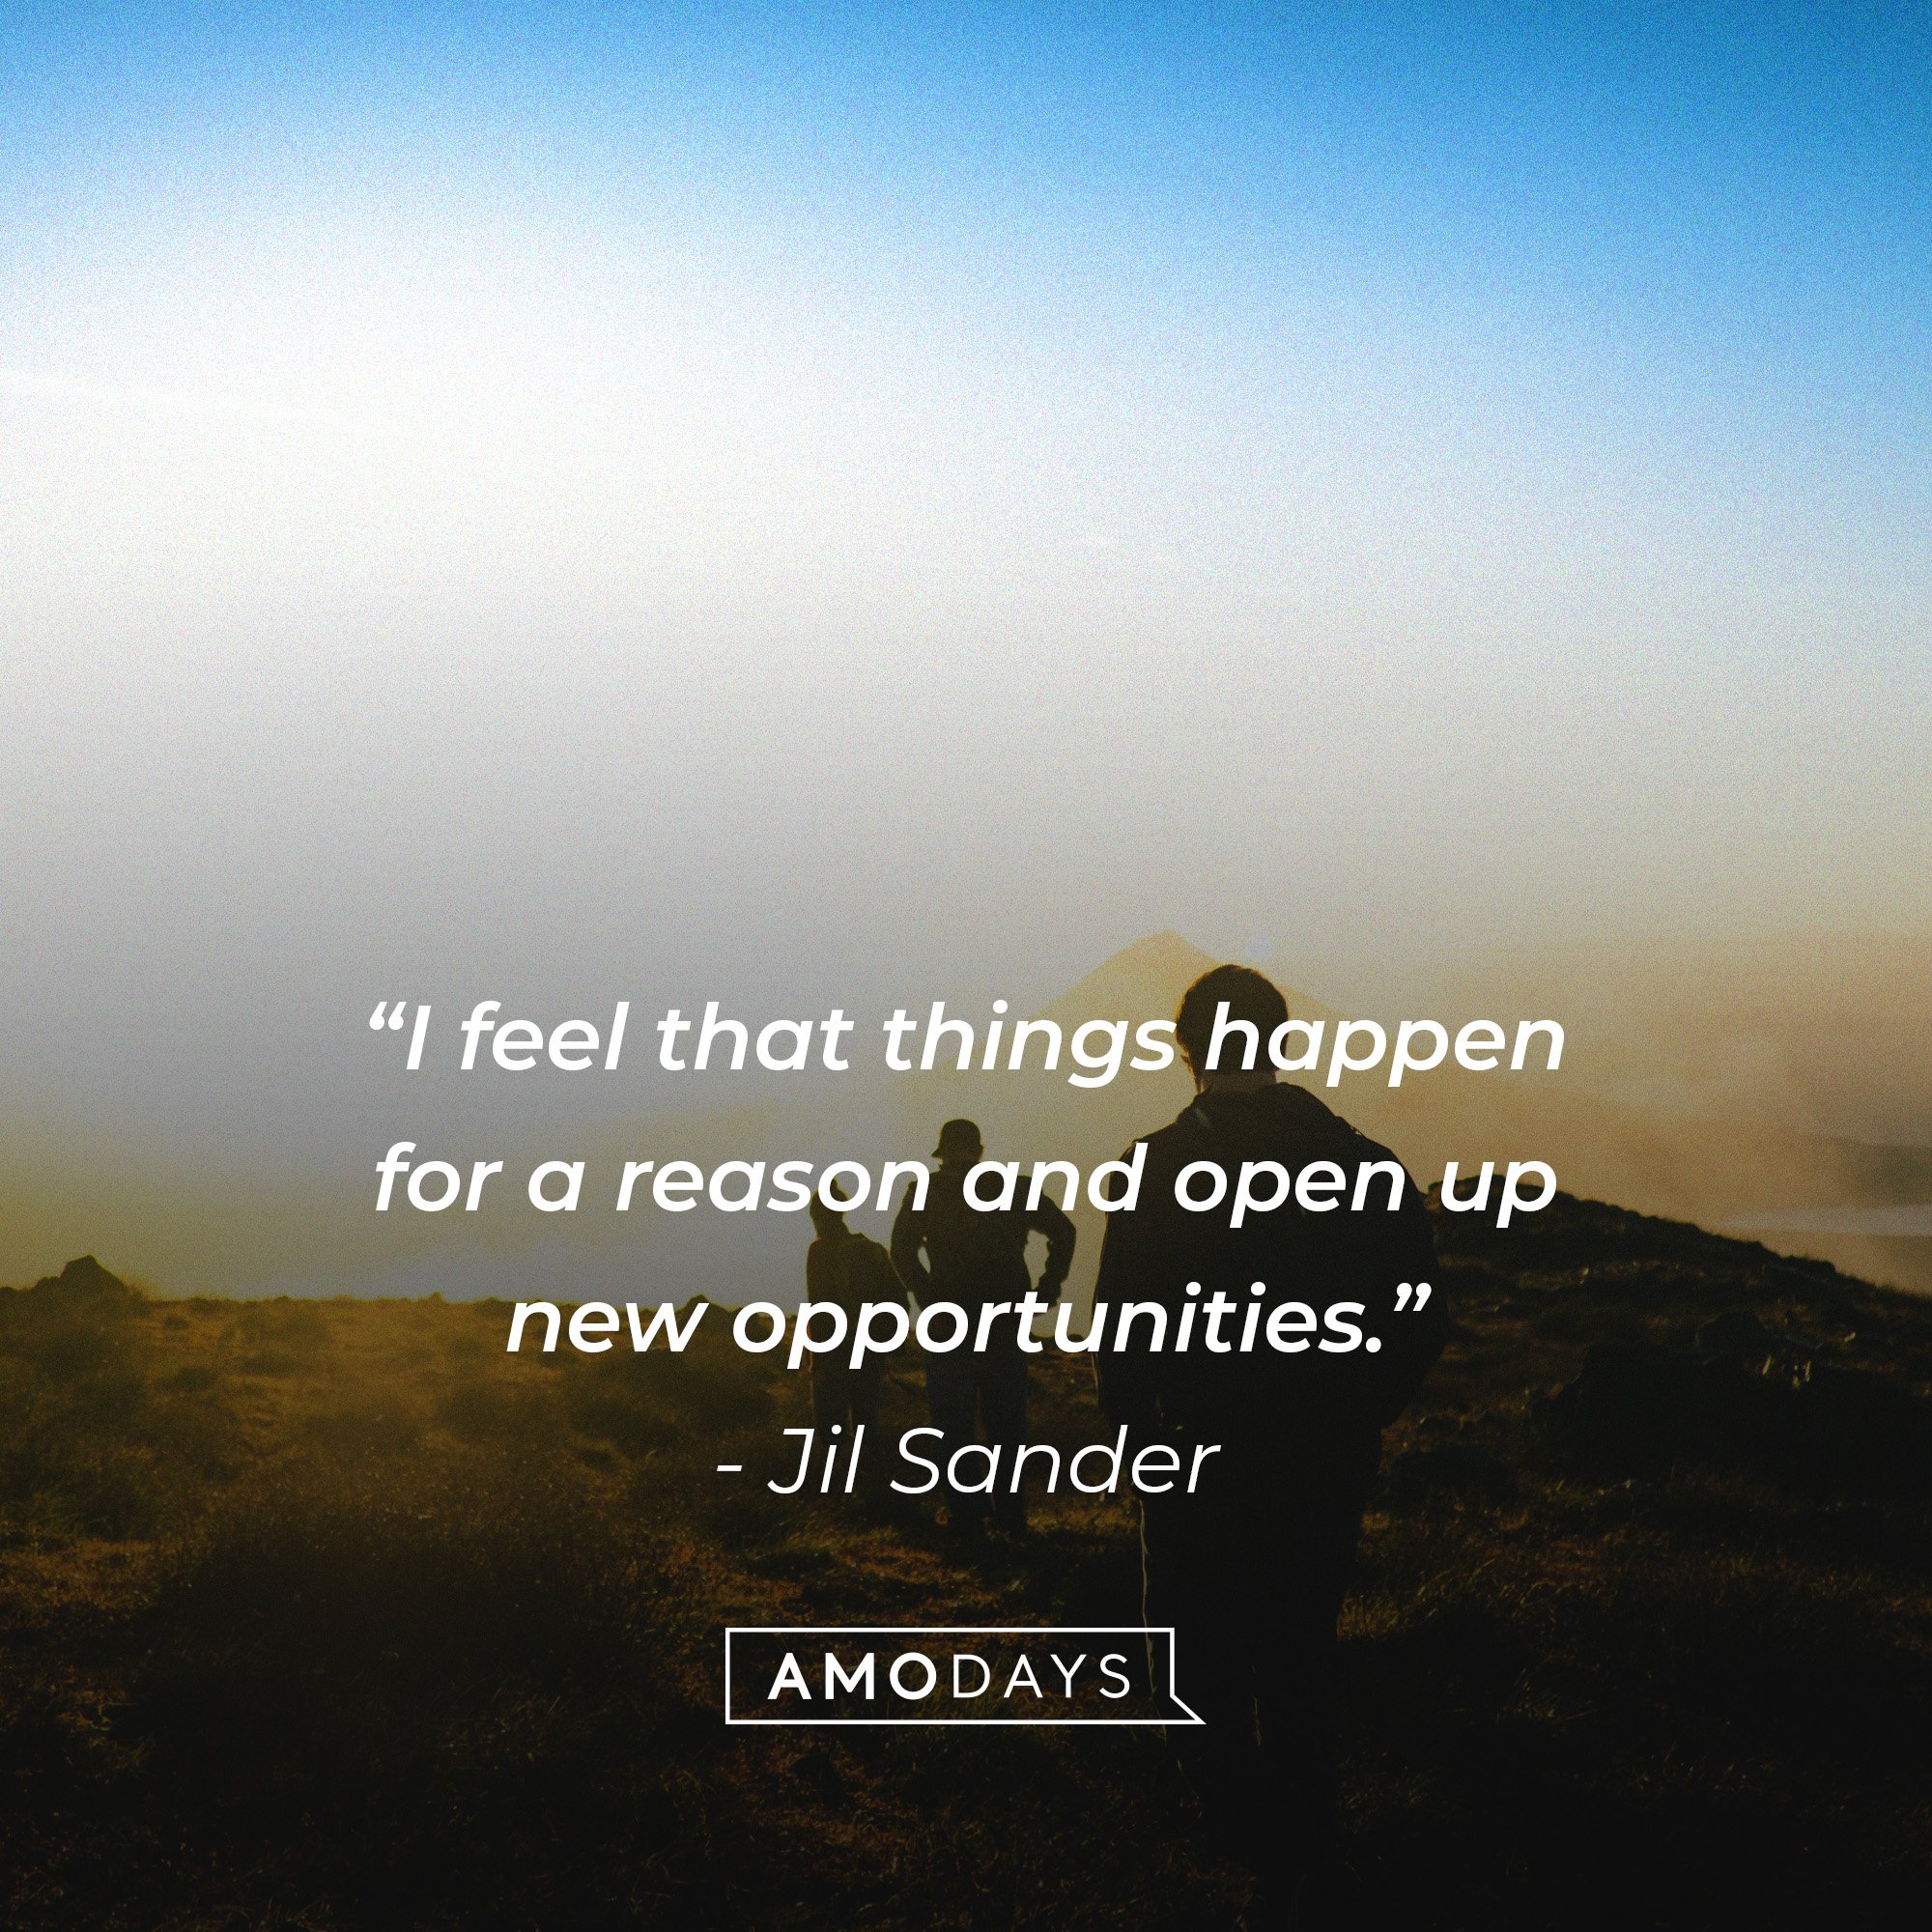 Jil Sander's quote: “I feel that things happen for a reason and open up new opportunities.” | Image: AmoDays